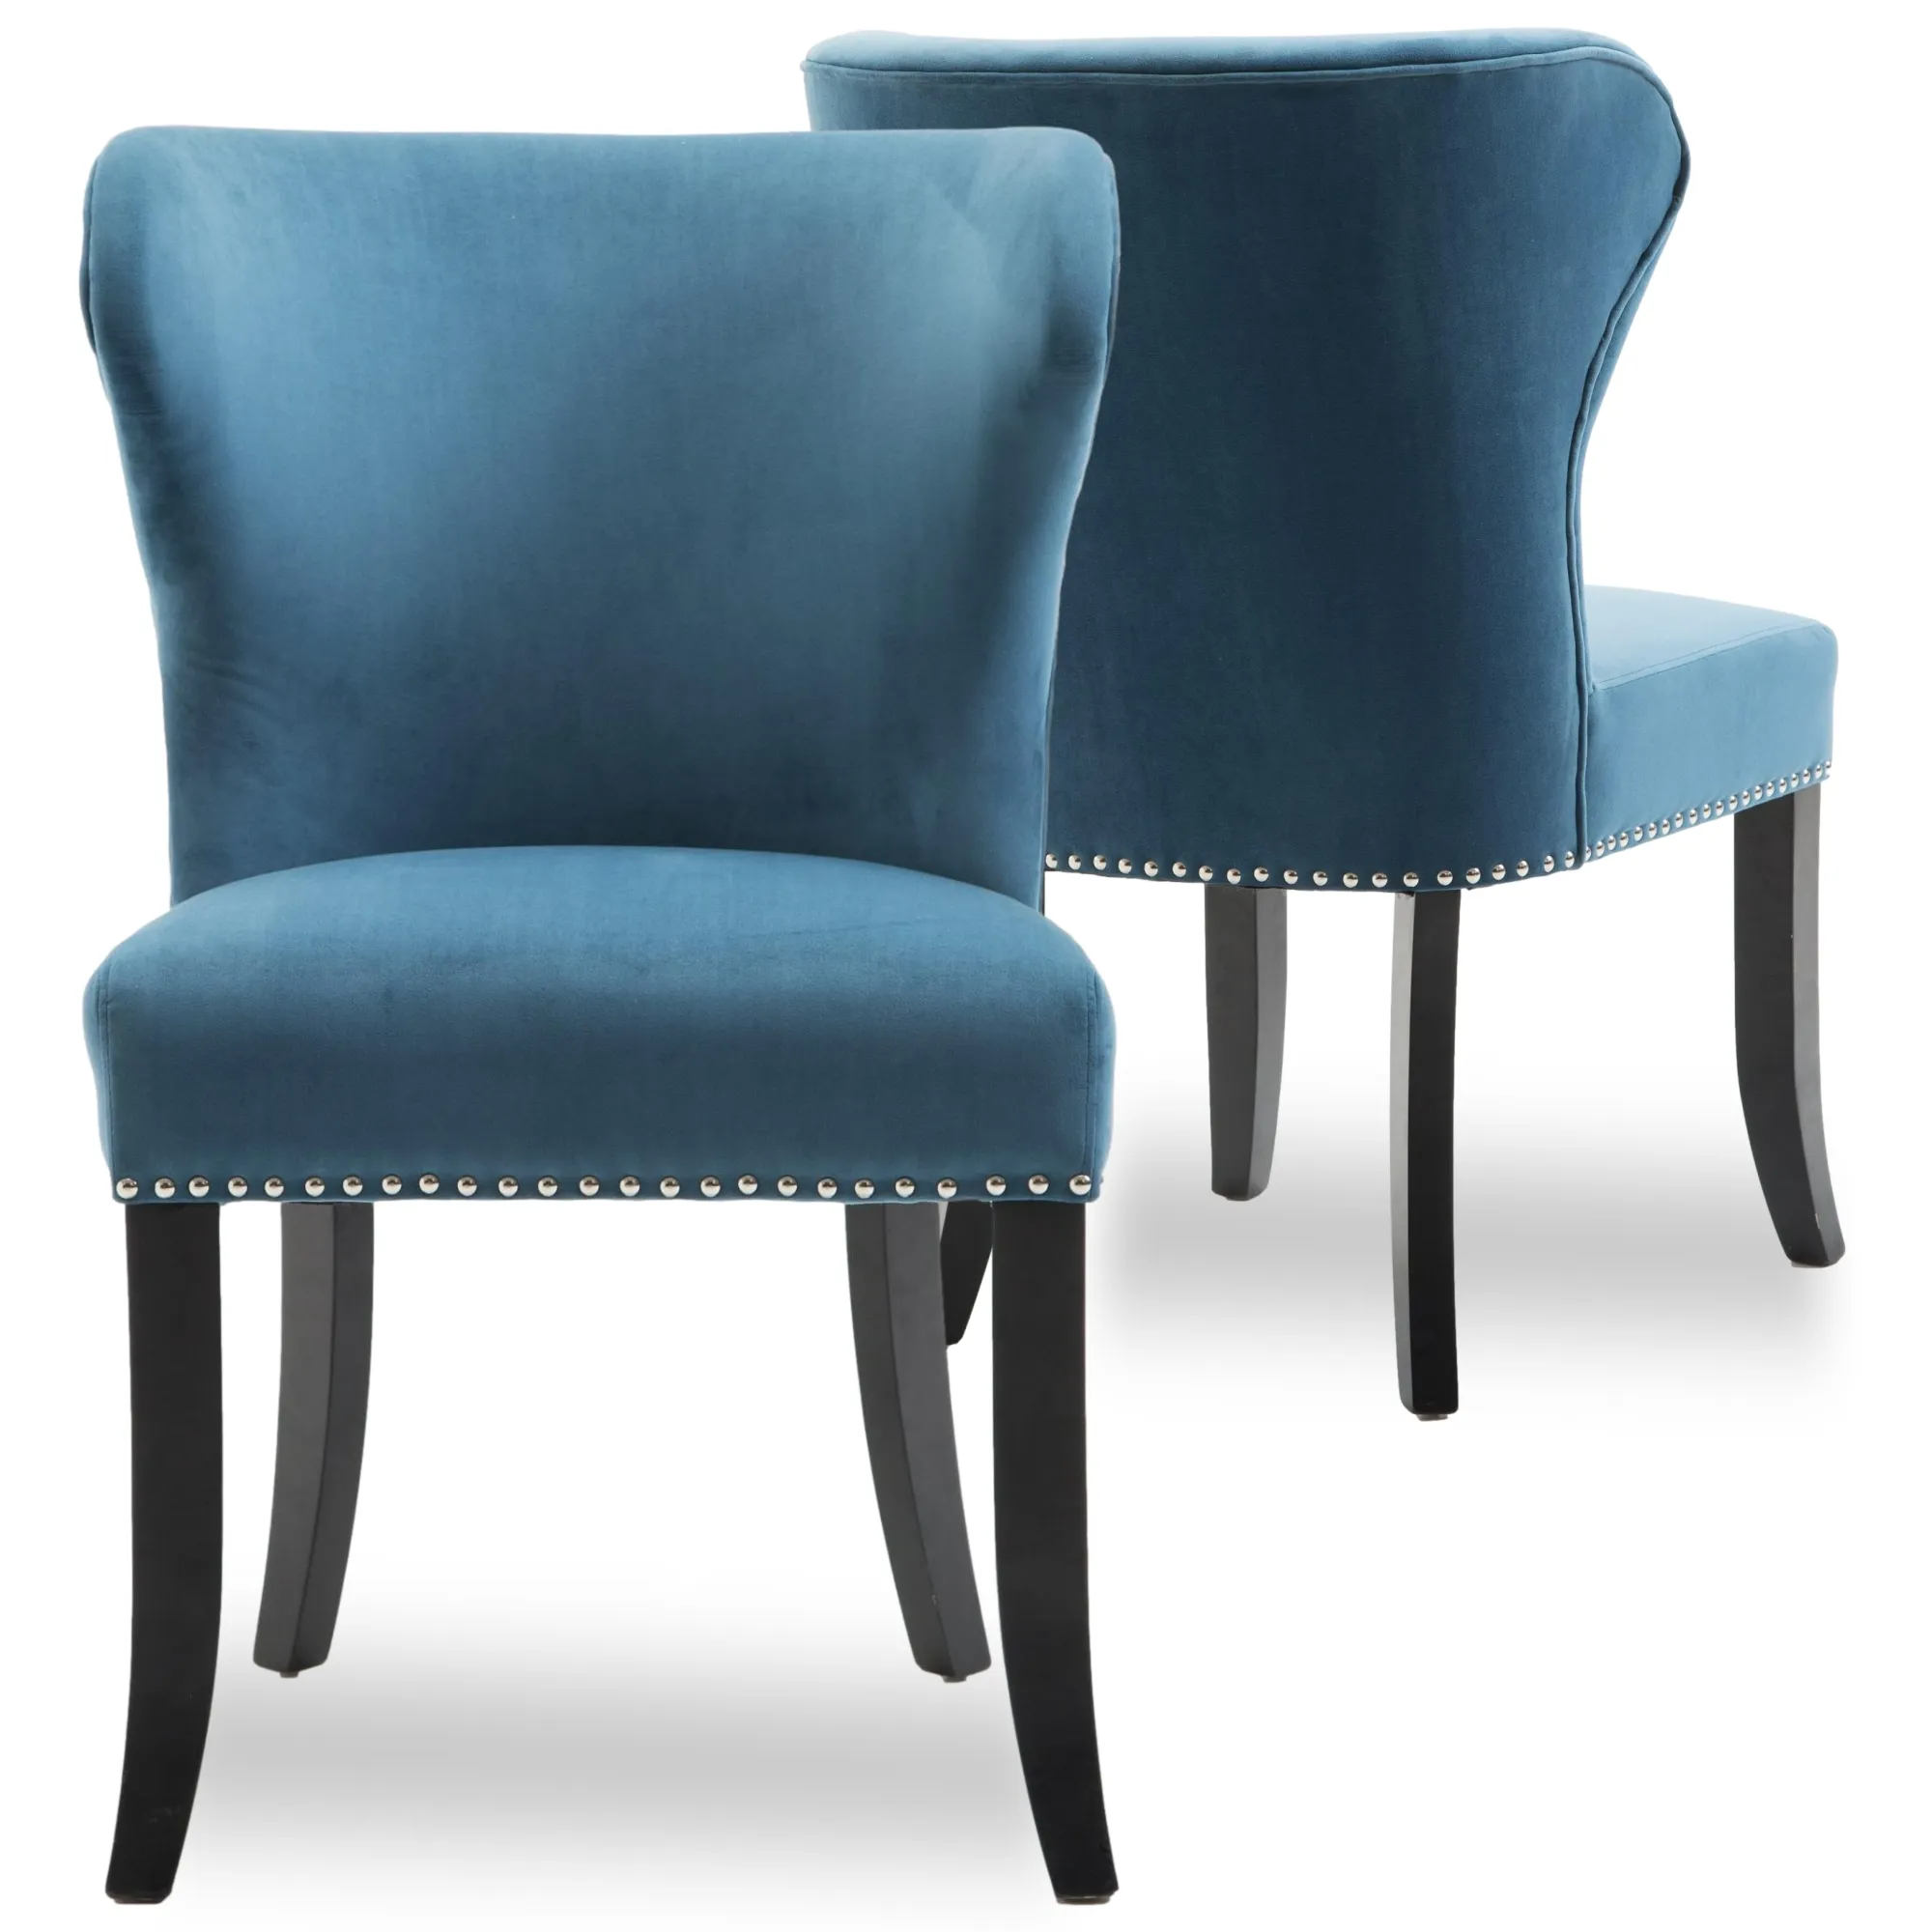 Stylish Blue Velvet Upholstered Tufted Solid Wood Legs Kitchen Dining Chair